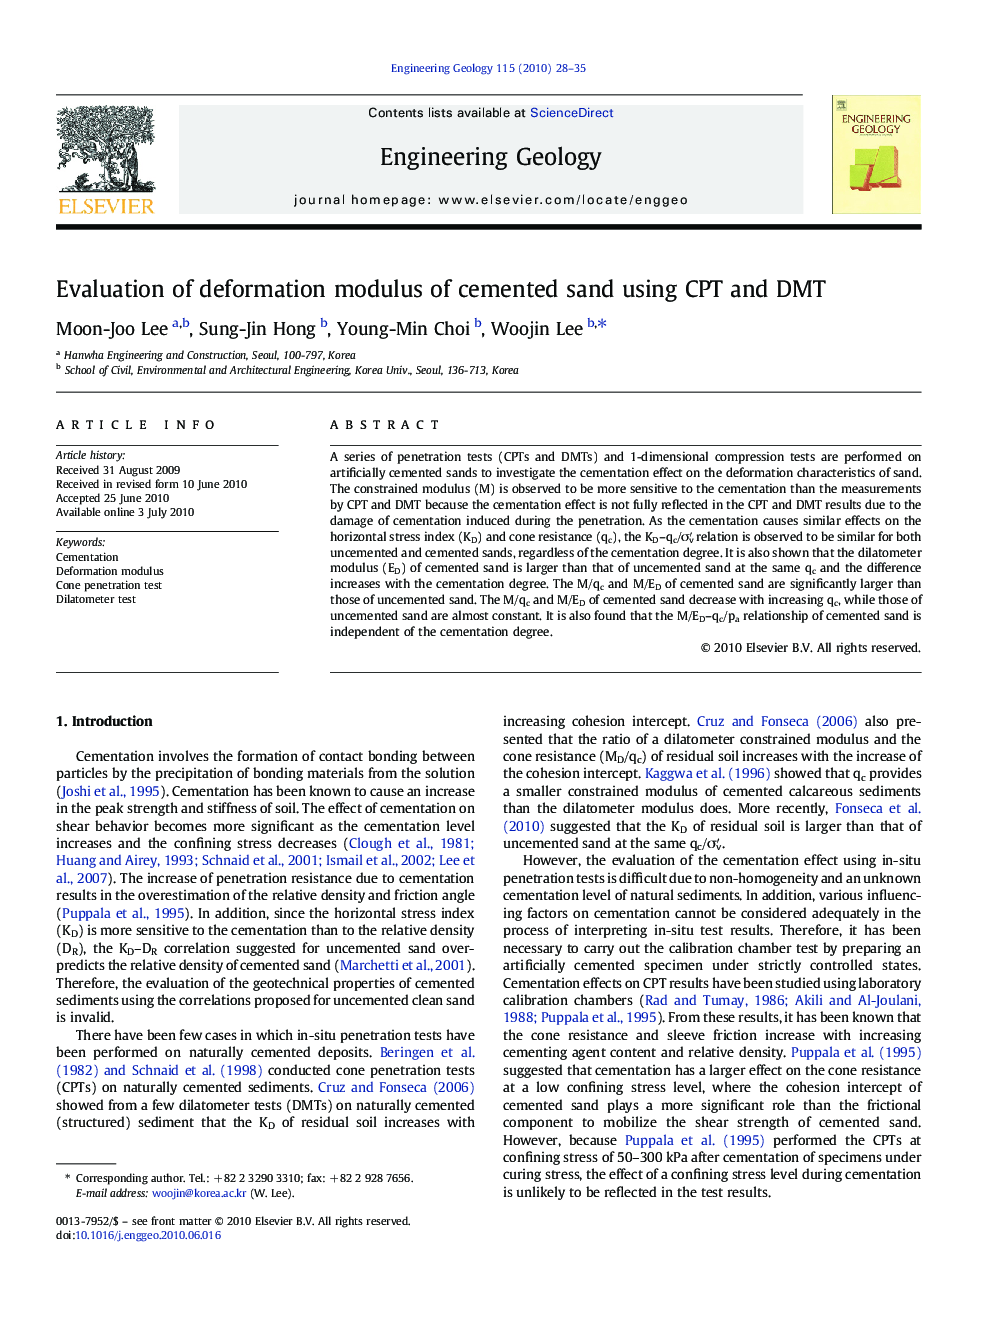 Evaluation of deformation modulus of cemented sand using CPT and DMT